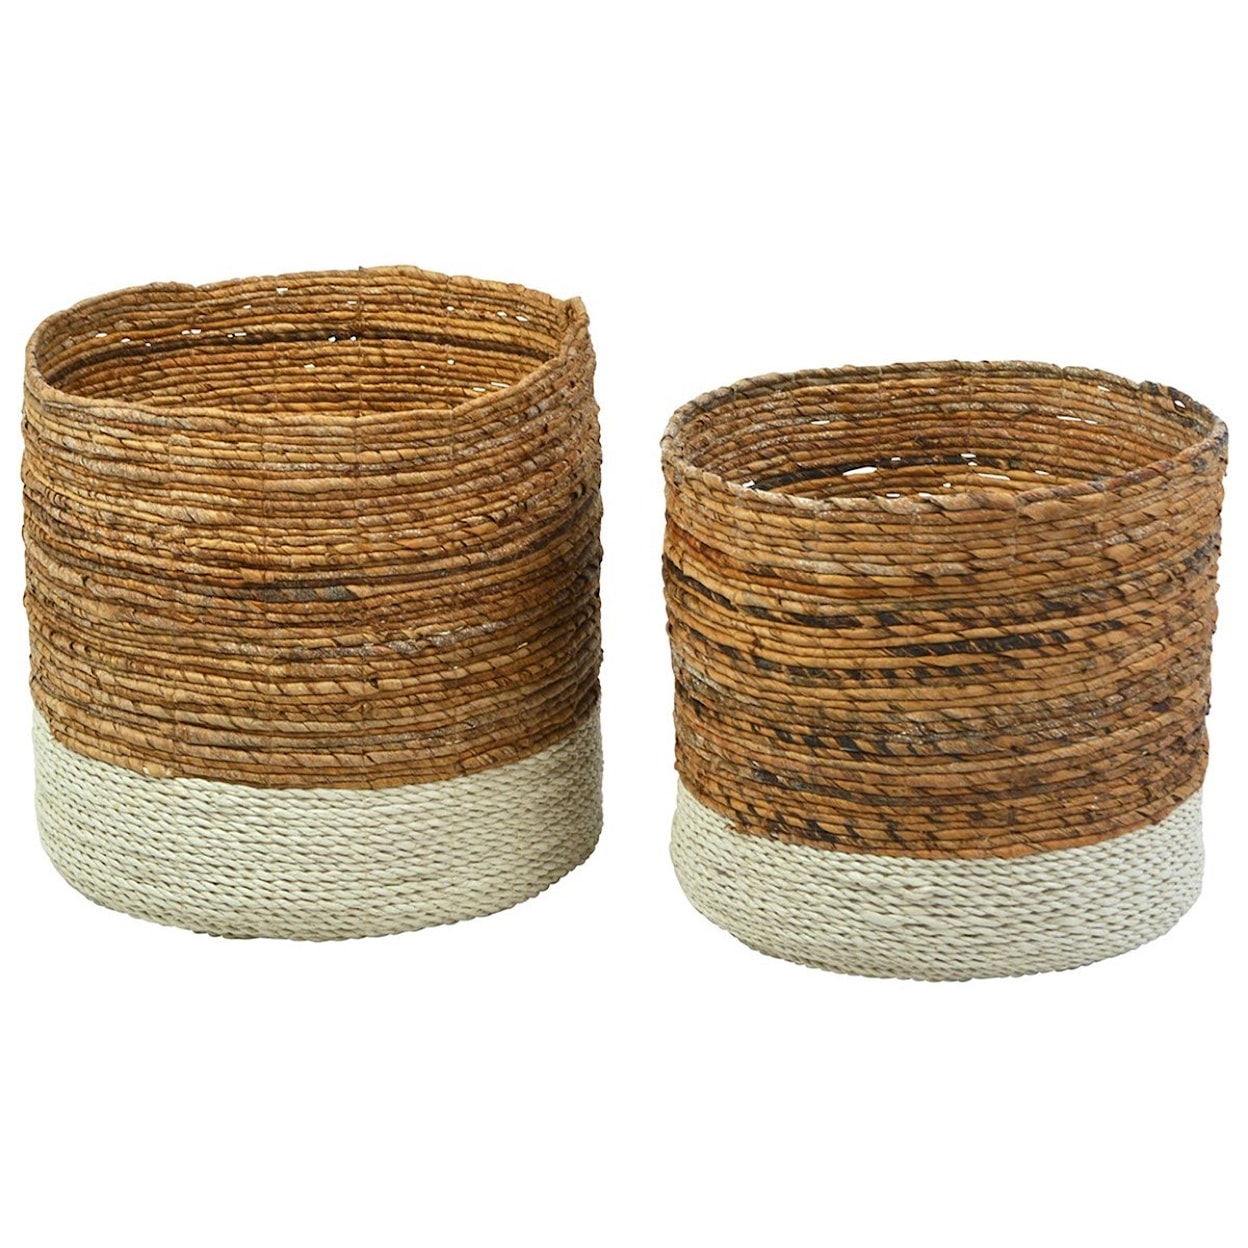 Dovetail Furniture Accessories Basket Set of 2